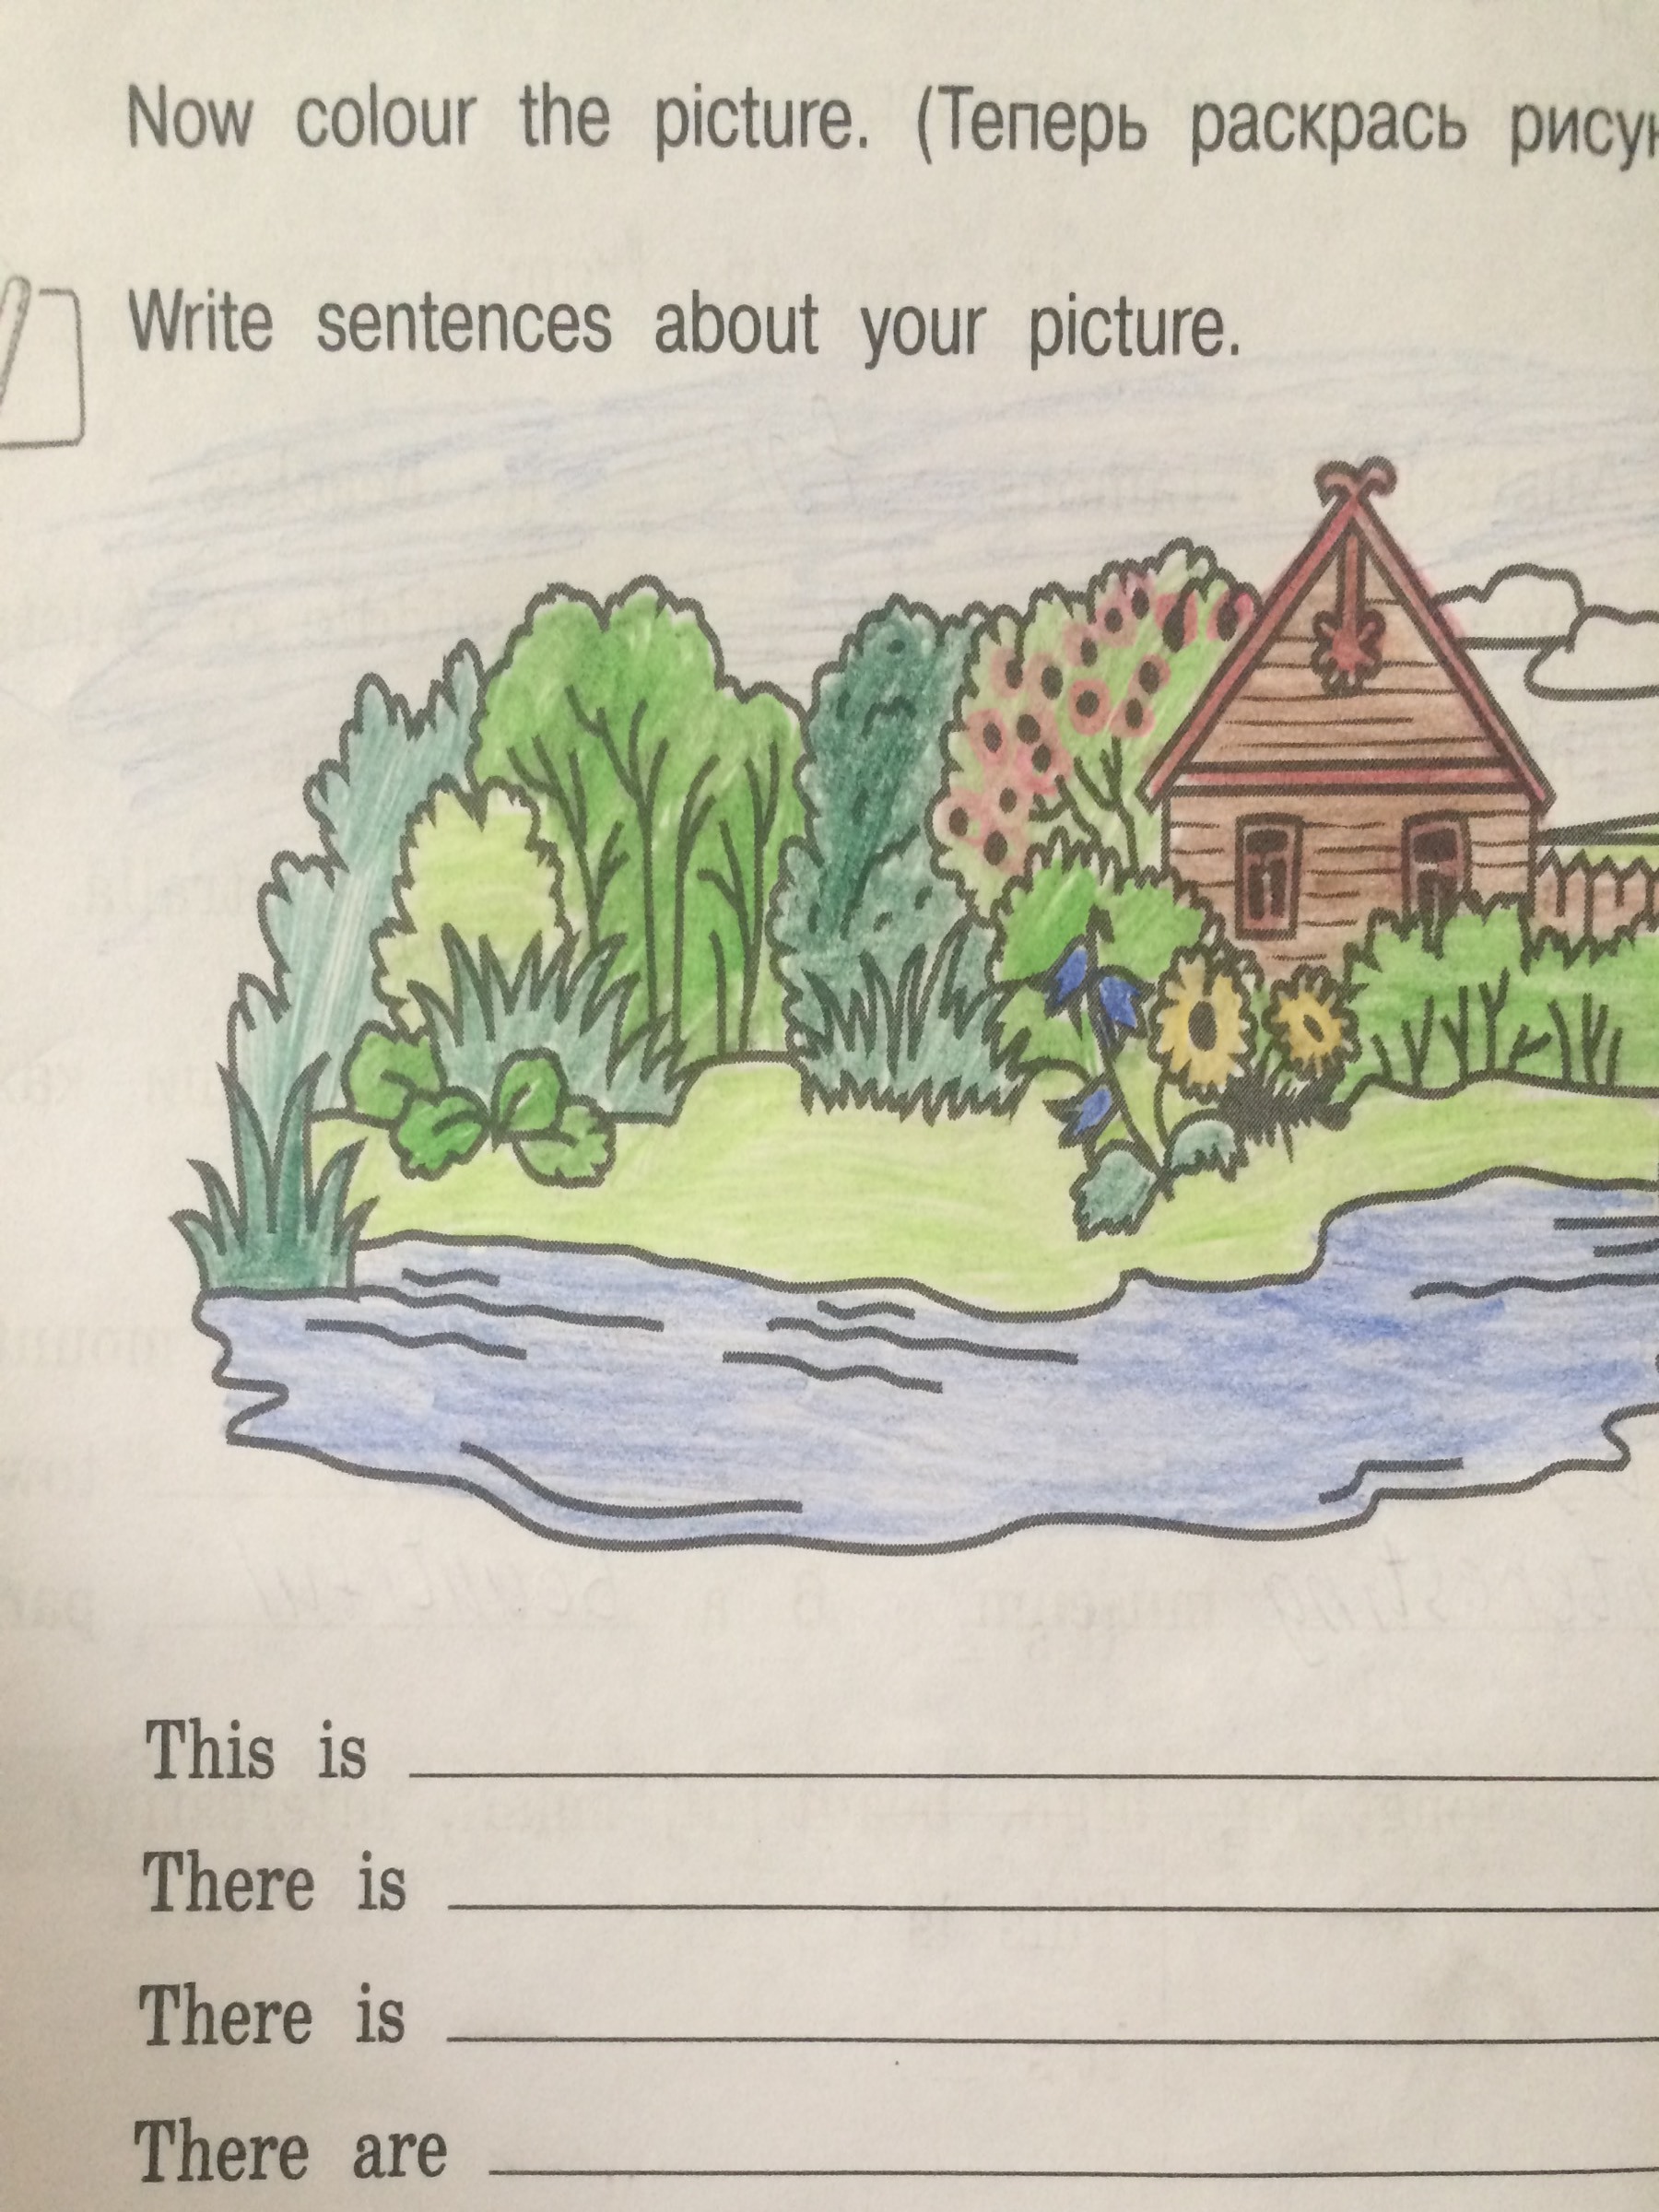 Write sentences about your picture?